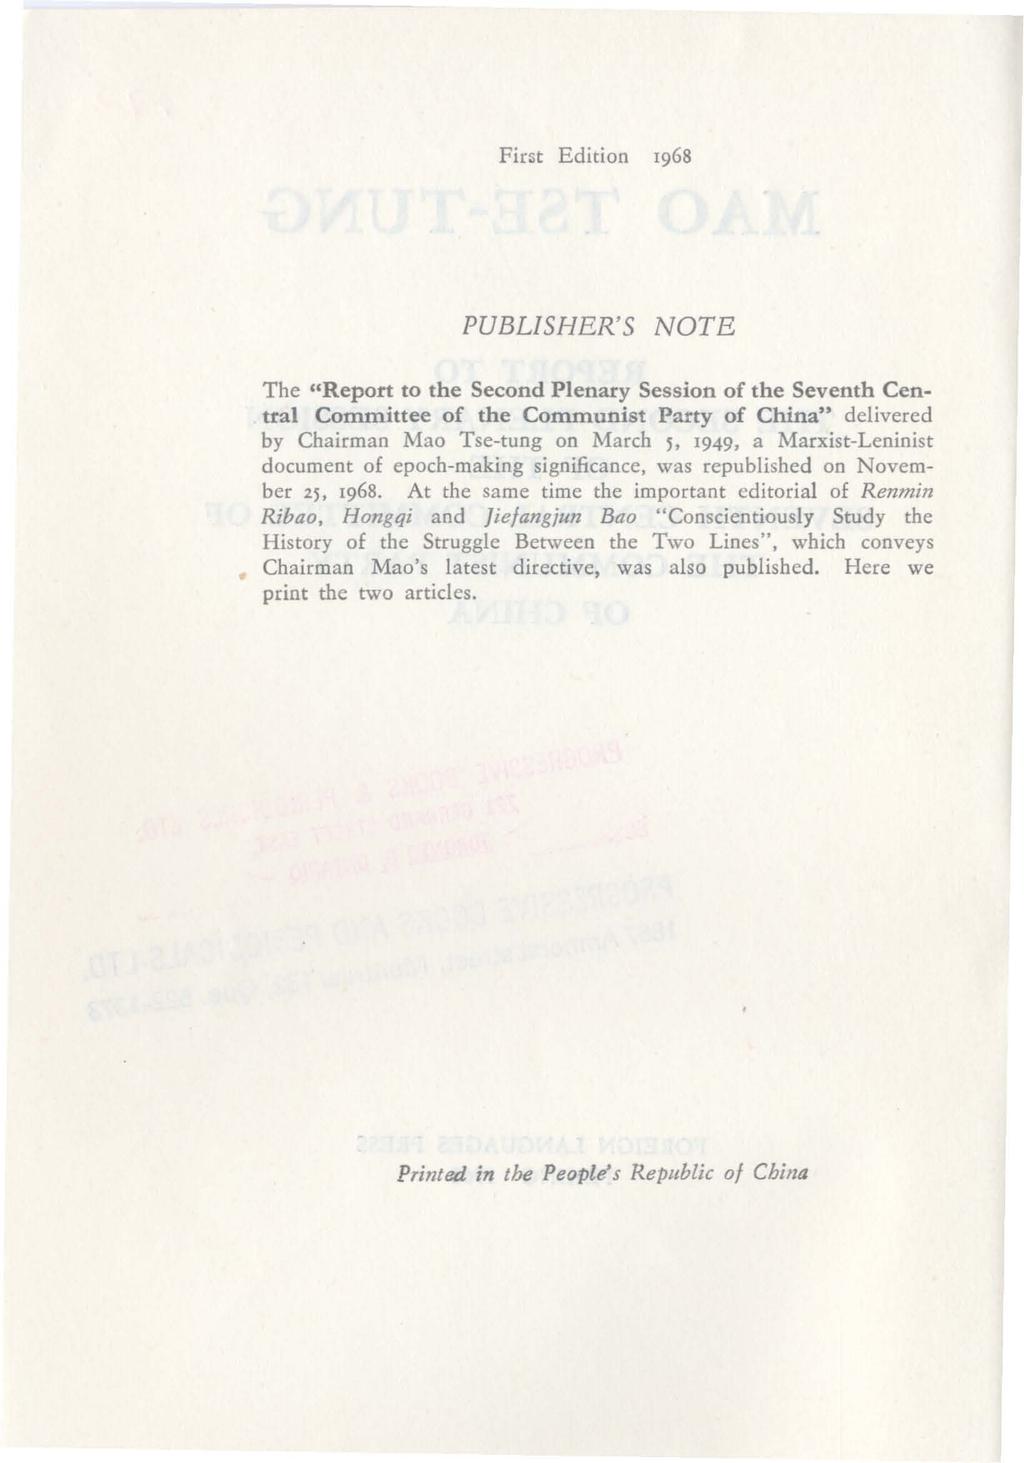 First Edition 1968 PUBLISHER'S NOTE The "Report to the Second Plenary Session of the Seventh Central Committee of the Communist Party of China" delivered by Chairman Mao Tse-tung on March j, 1949, a